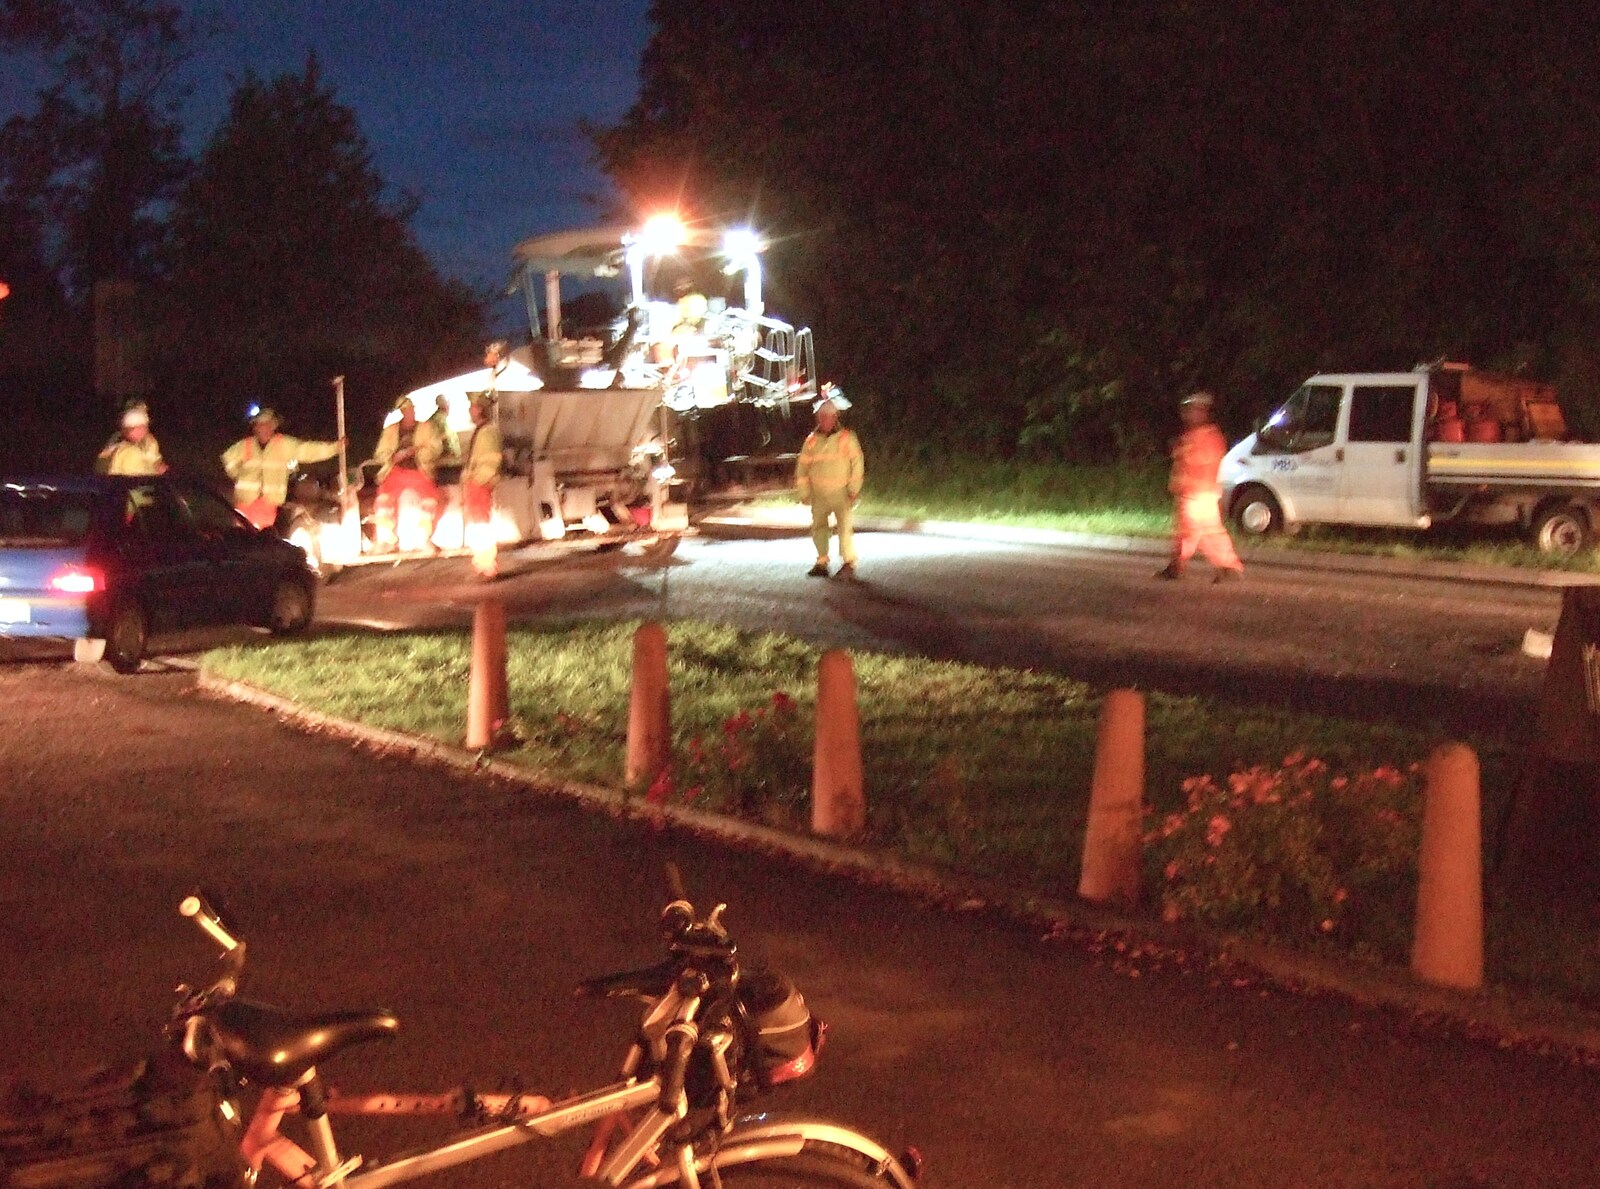 The resurfacing goes on into the night from Paella and Roadworks, Brome, Suffolk - 9th July 2011